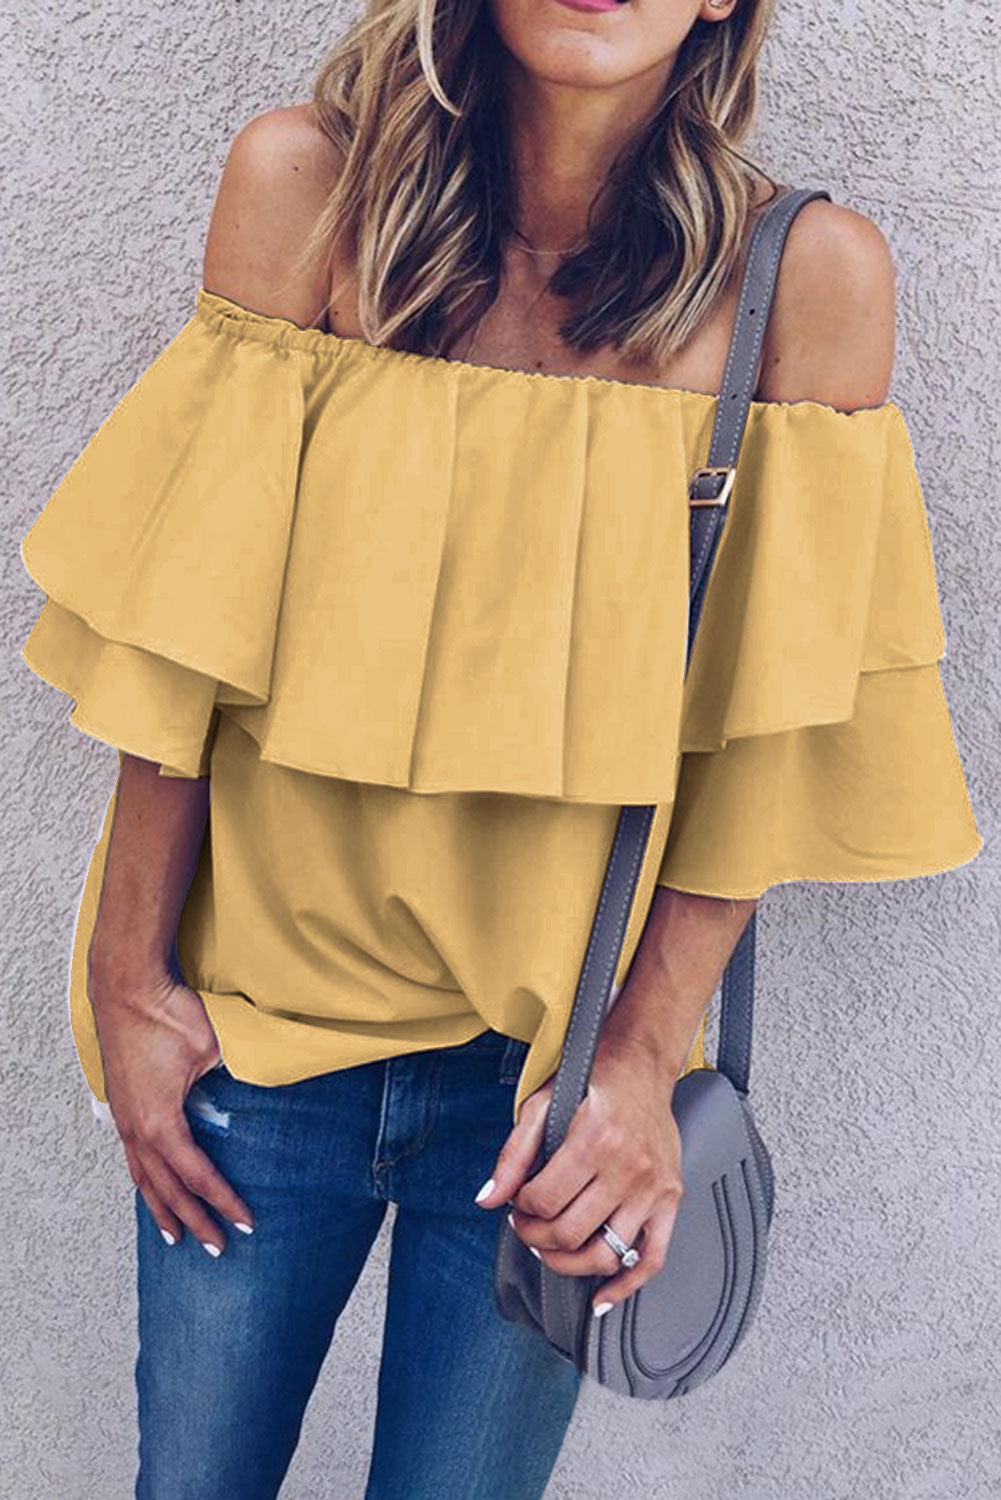 Women Summer Sexy Off Shoulder Blouses Ruffles Short Sleeves Tee Tops Casual Solid Color T-Shirts Sai Feel